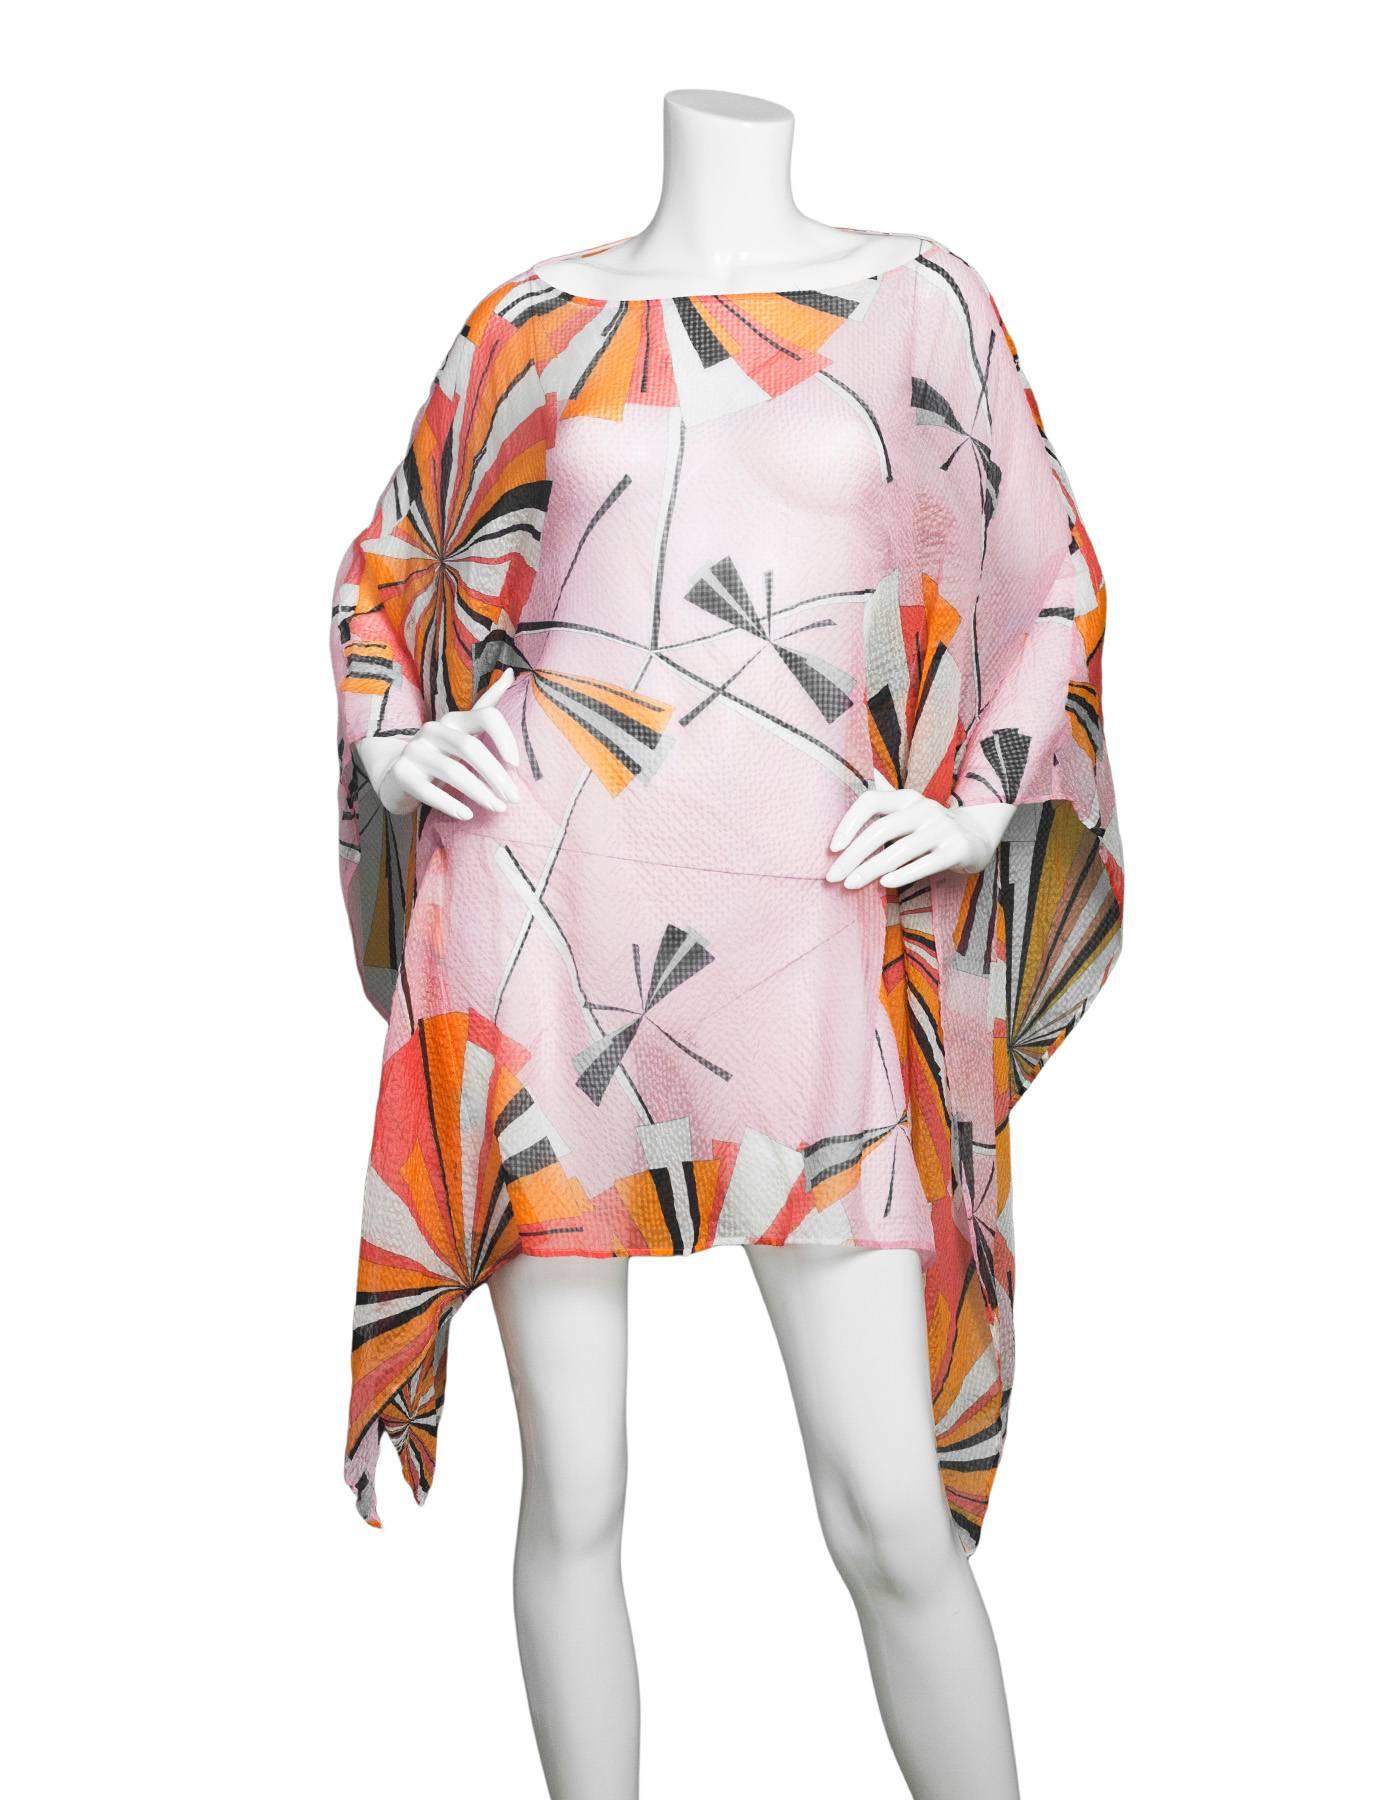 Emilio Pucci Pink Sheer Silk Kaftan Sz US4

Made In: Italy
Color: Pink, orange, black
Composition: 100% silk
Lining: None
Closure/Opening: Pull over
Overall Condition: Excellent pre-owned condition

Marked Size: US4
Bust: 36"
Waist: